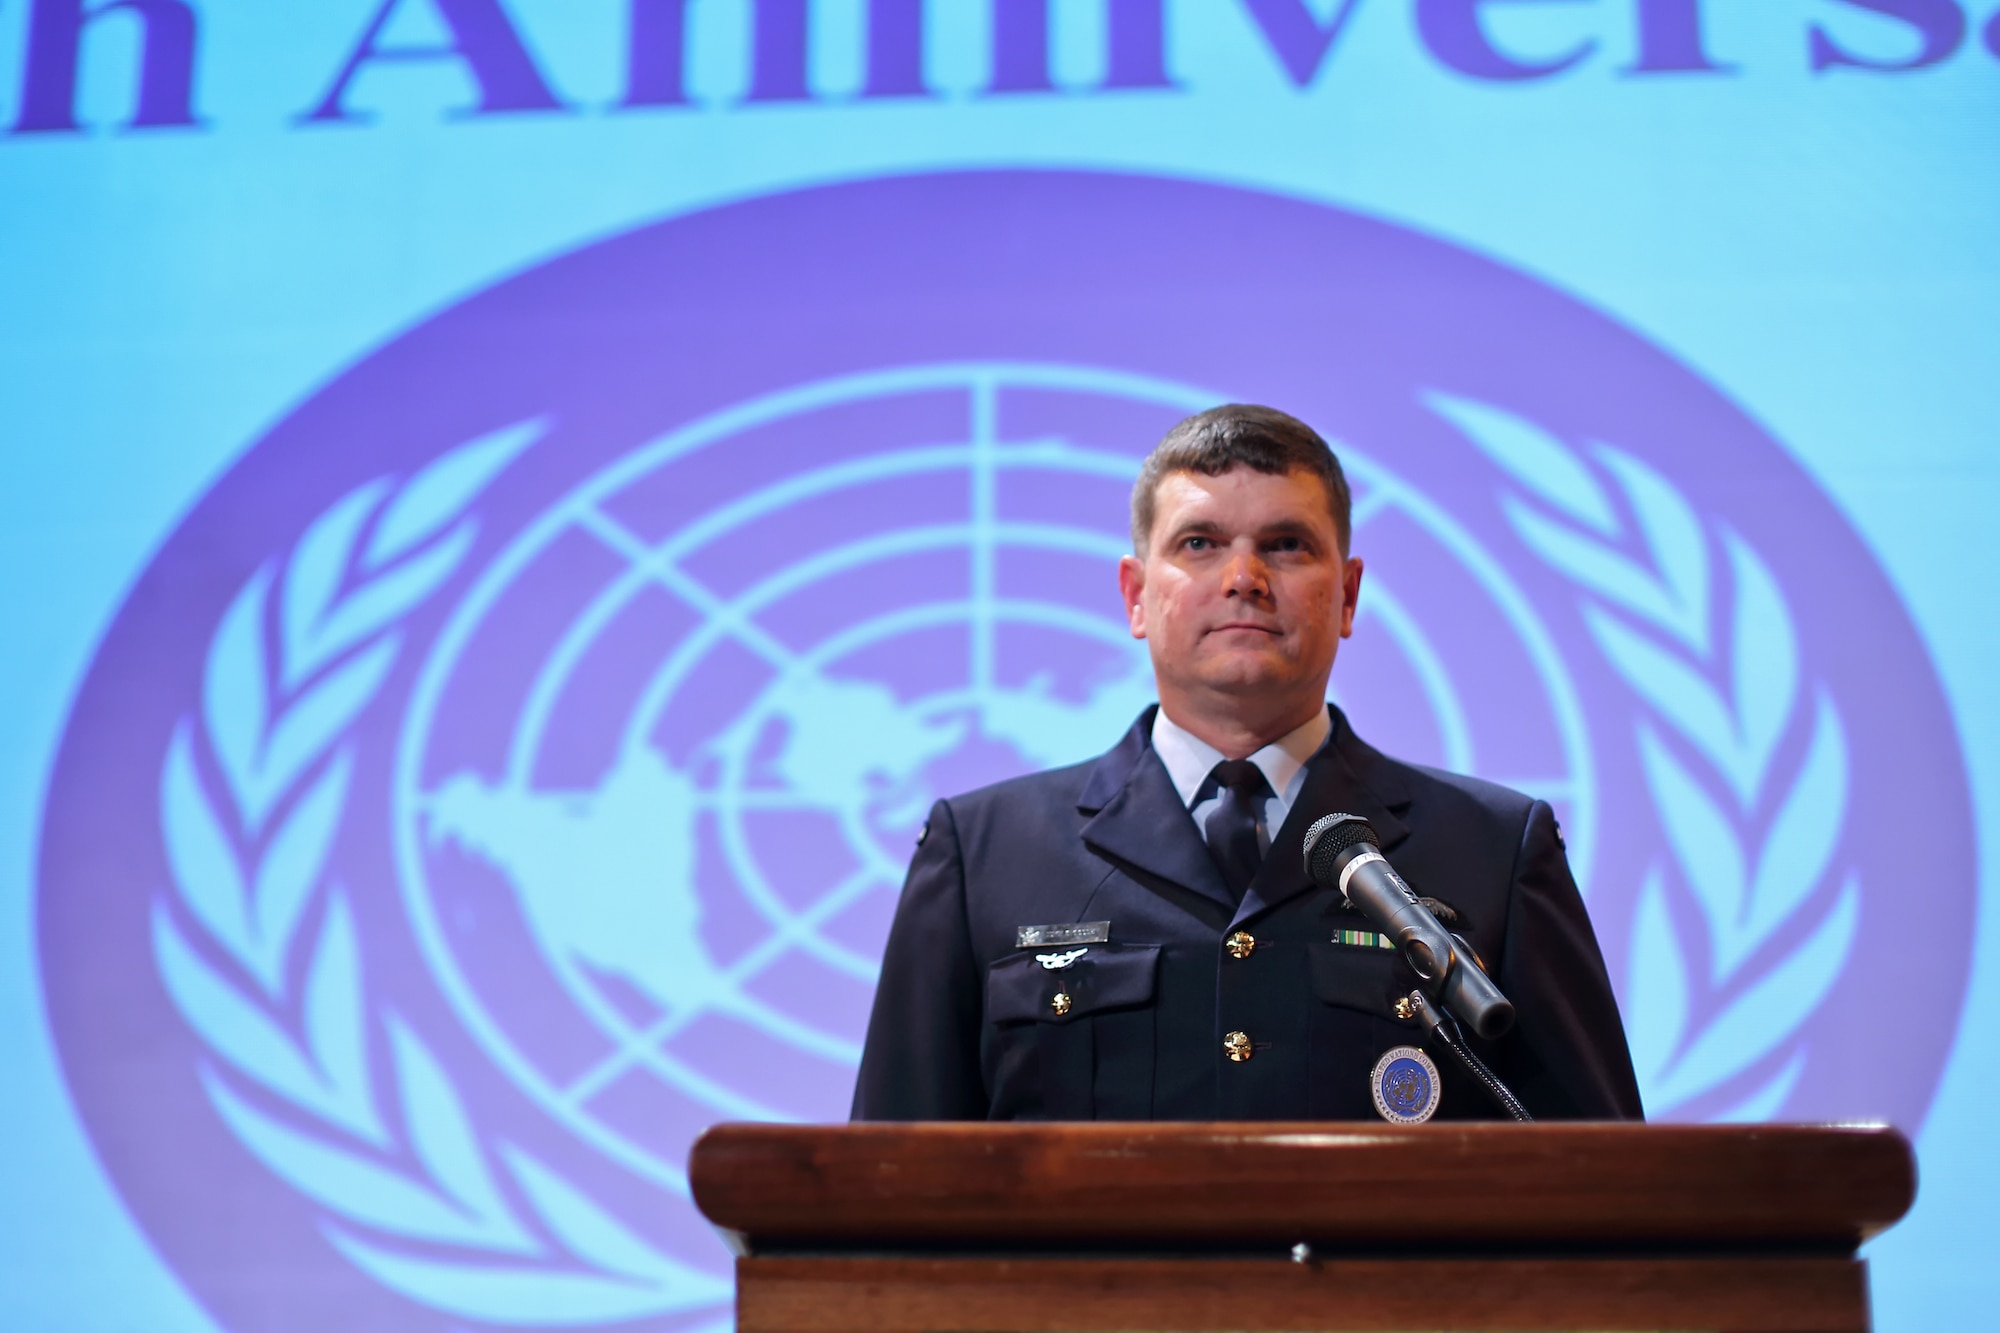 TOKYO, Japan -- Royal Australian Air Force Group Captain Luke Stoodley, United Nations Command (Rear) commander, is ready for speech, during the 67th Anniversary of the United Nations, Nov. 29, 2012 at New Sanno Hotel.  Stoodley assumed command of UNC(R) in Jan. 24, 2012. (U.S. Air Force photo by Osakabe Yasuo) 